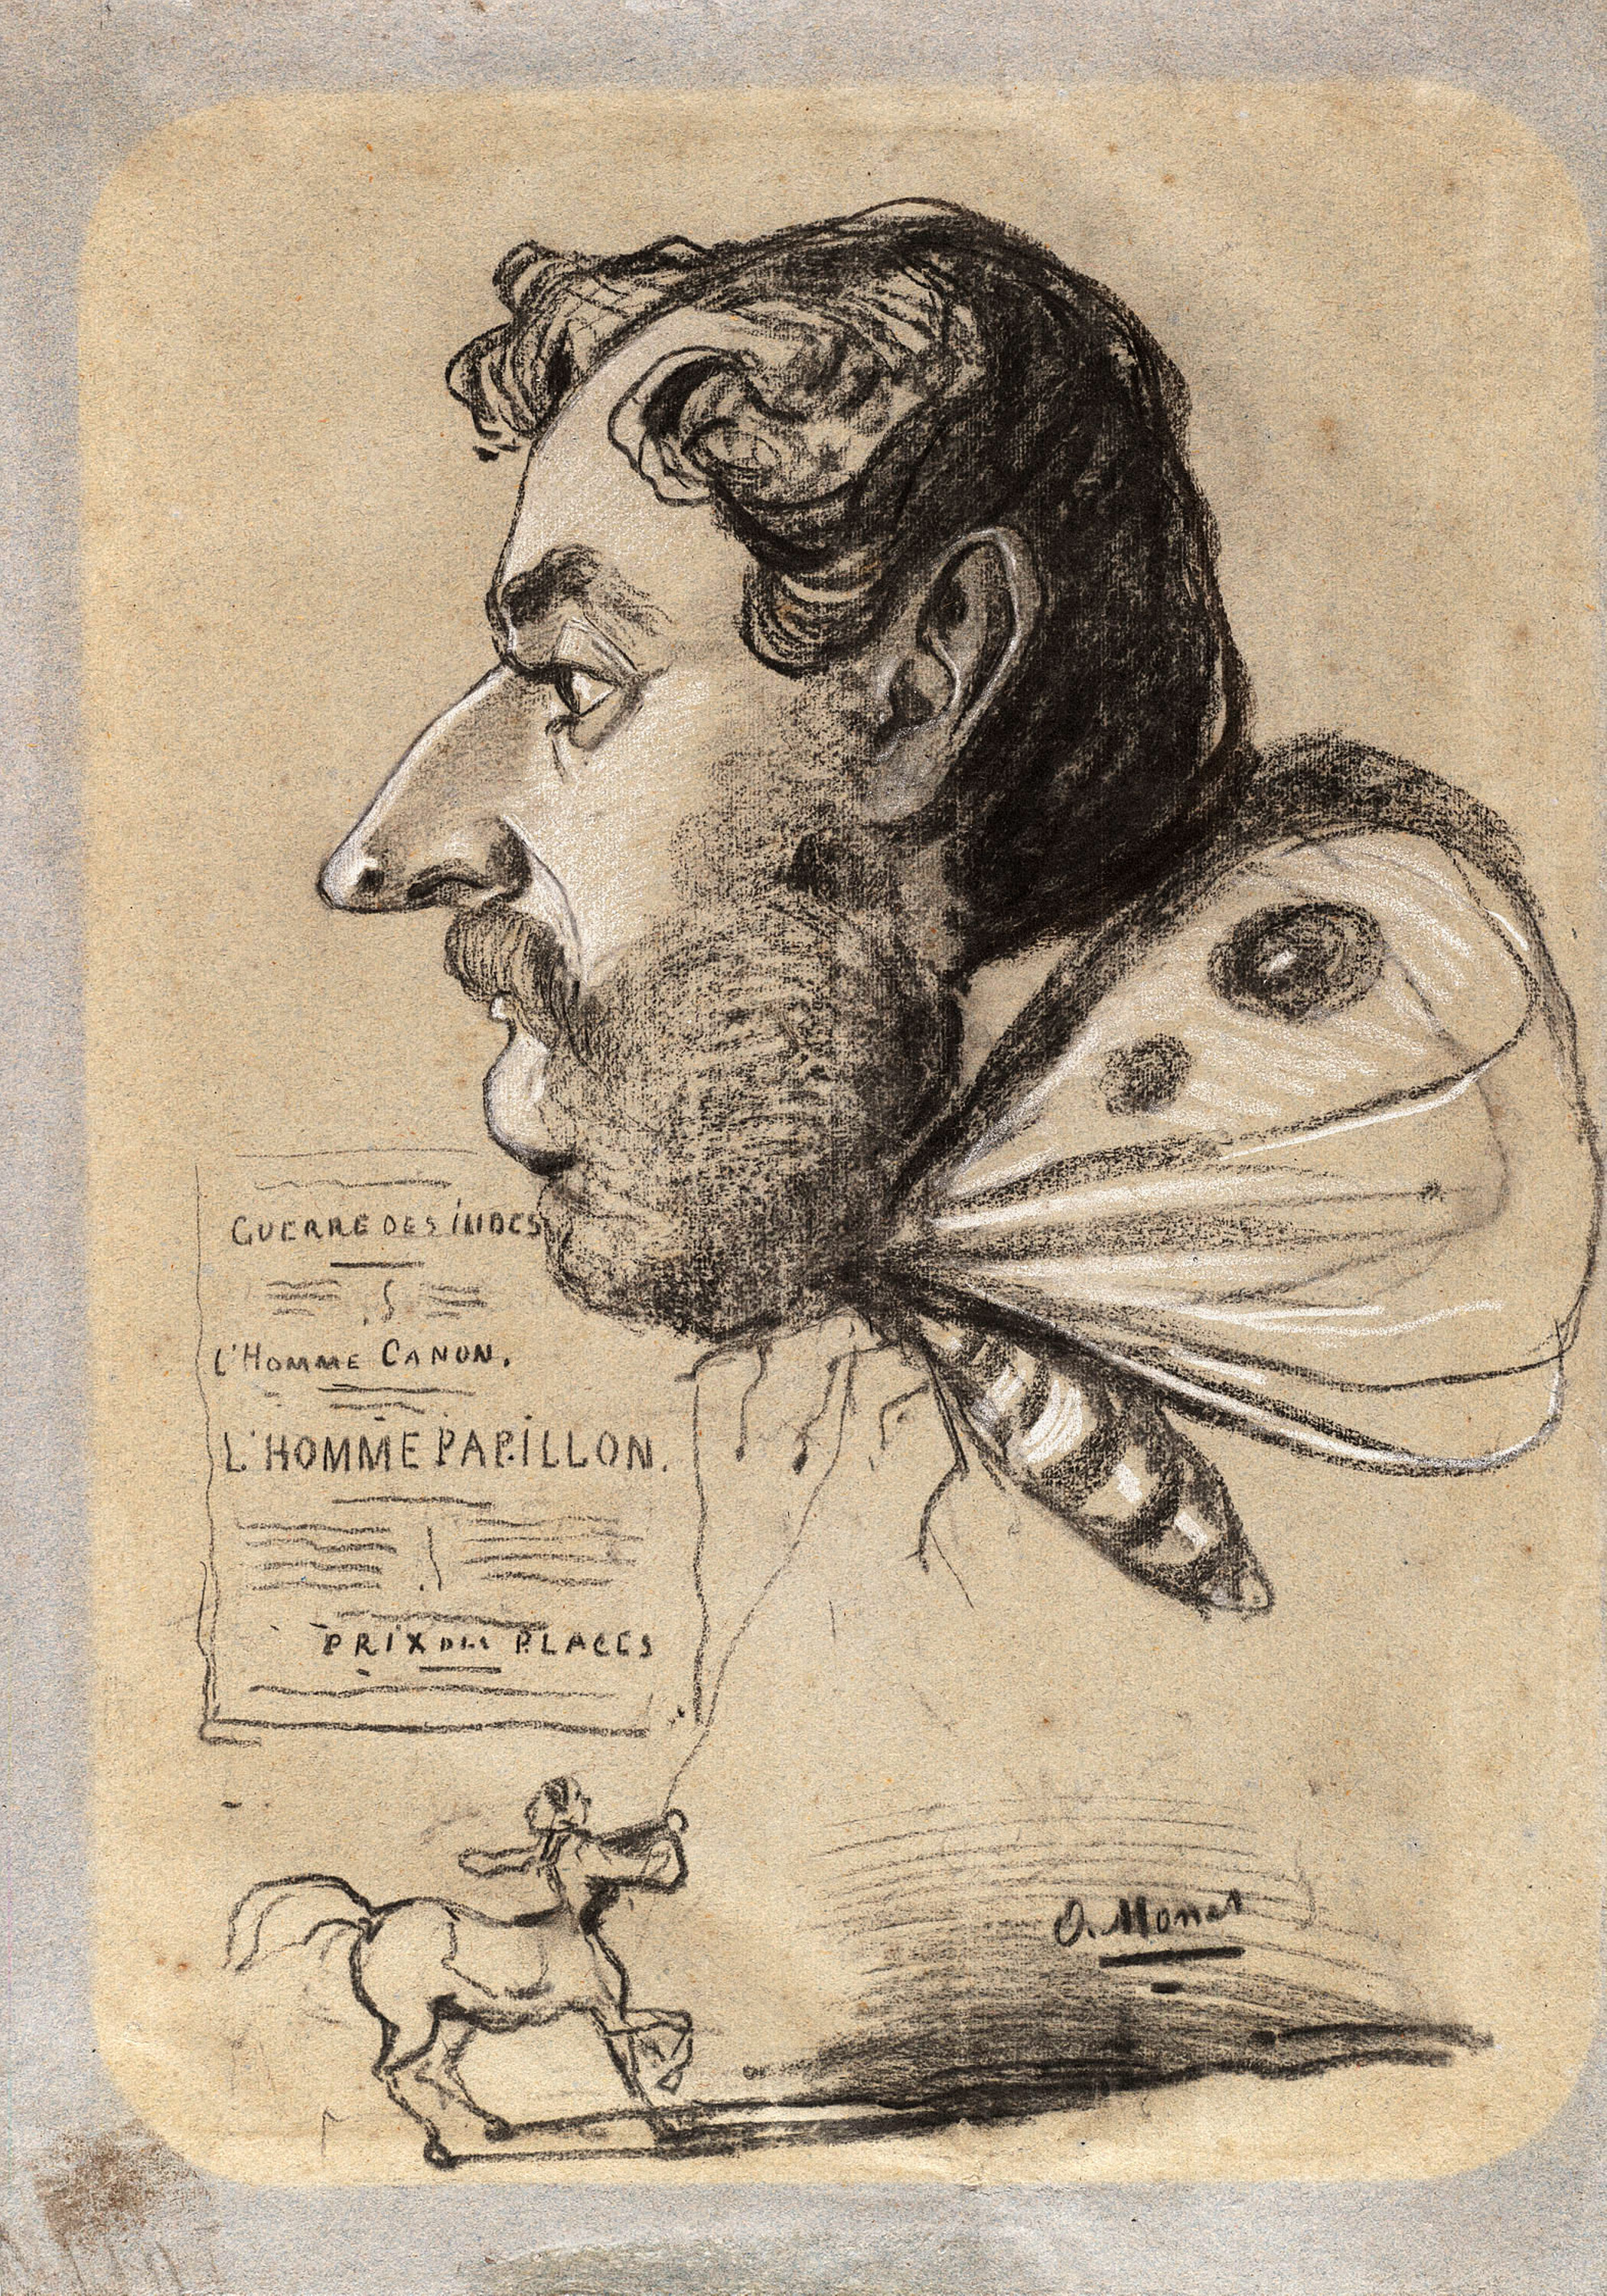 Caricature of Jules Didier (Butterfly Man) by Claude Monet - c. 1858 - 616 × 436 mm Art Institute of Chicago